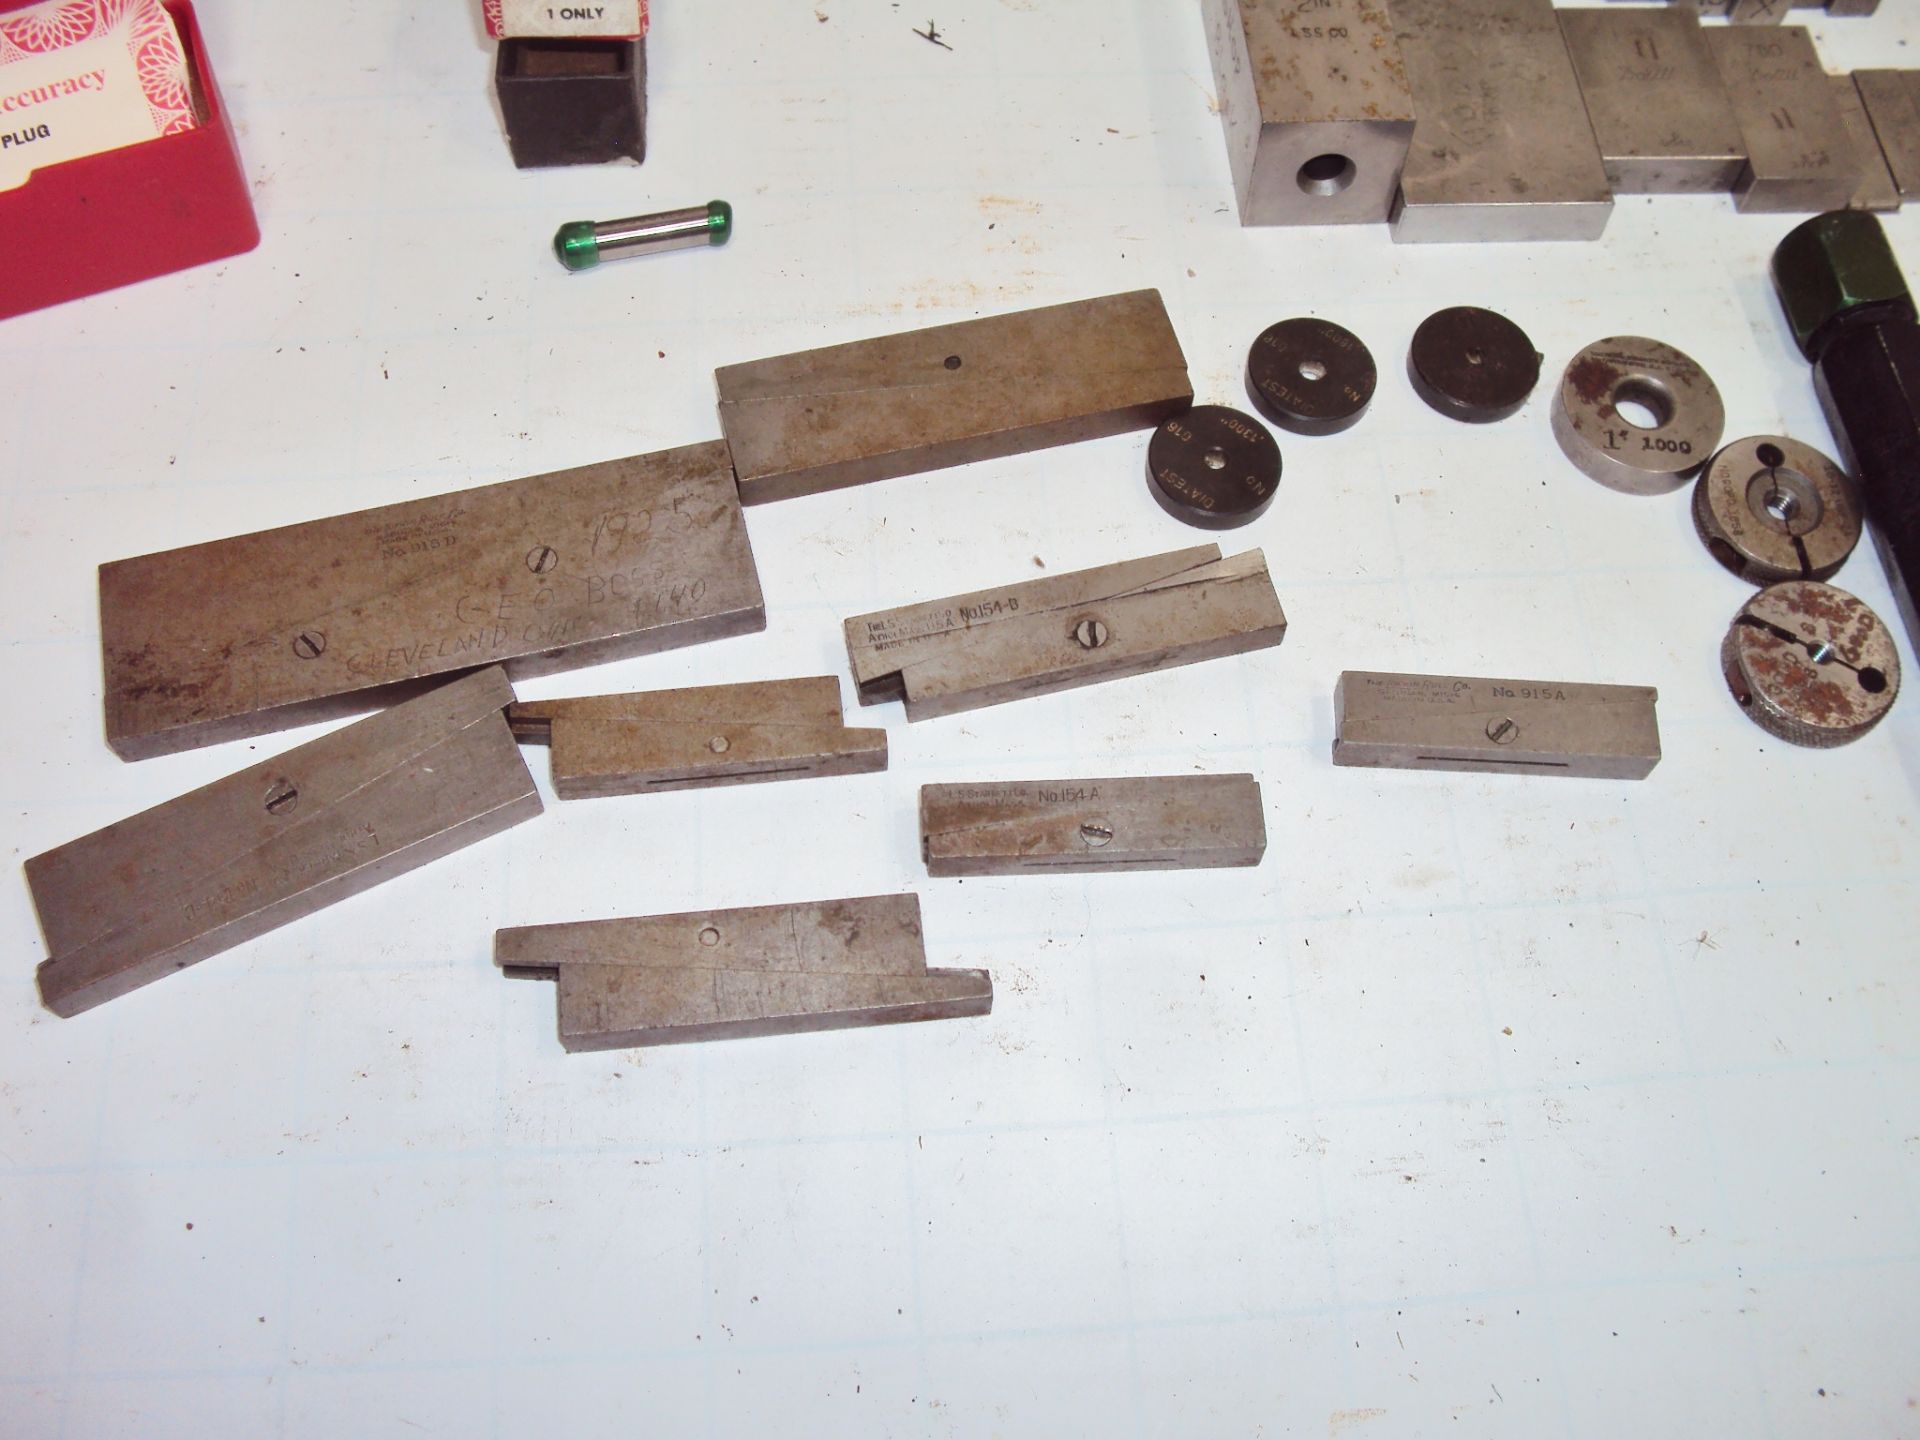 Gage Pin Sets, Gage Blocks, Setting Ring, End Rods & Thread Gages - Image 7 of 7